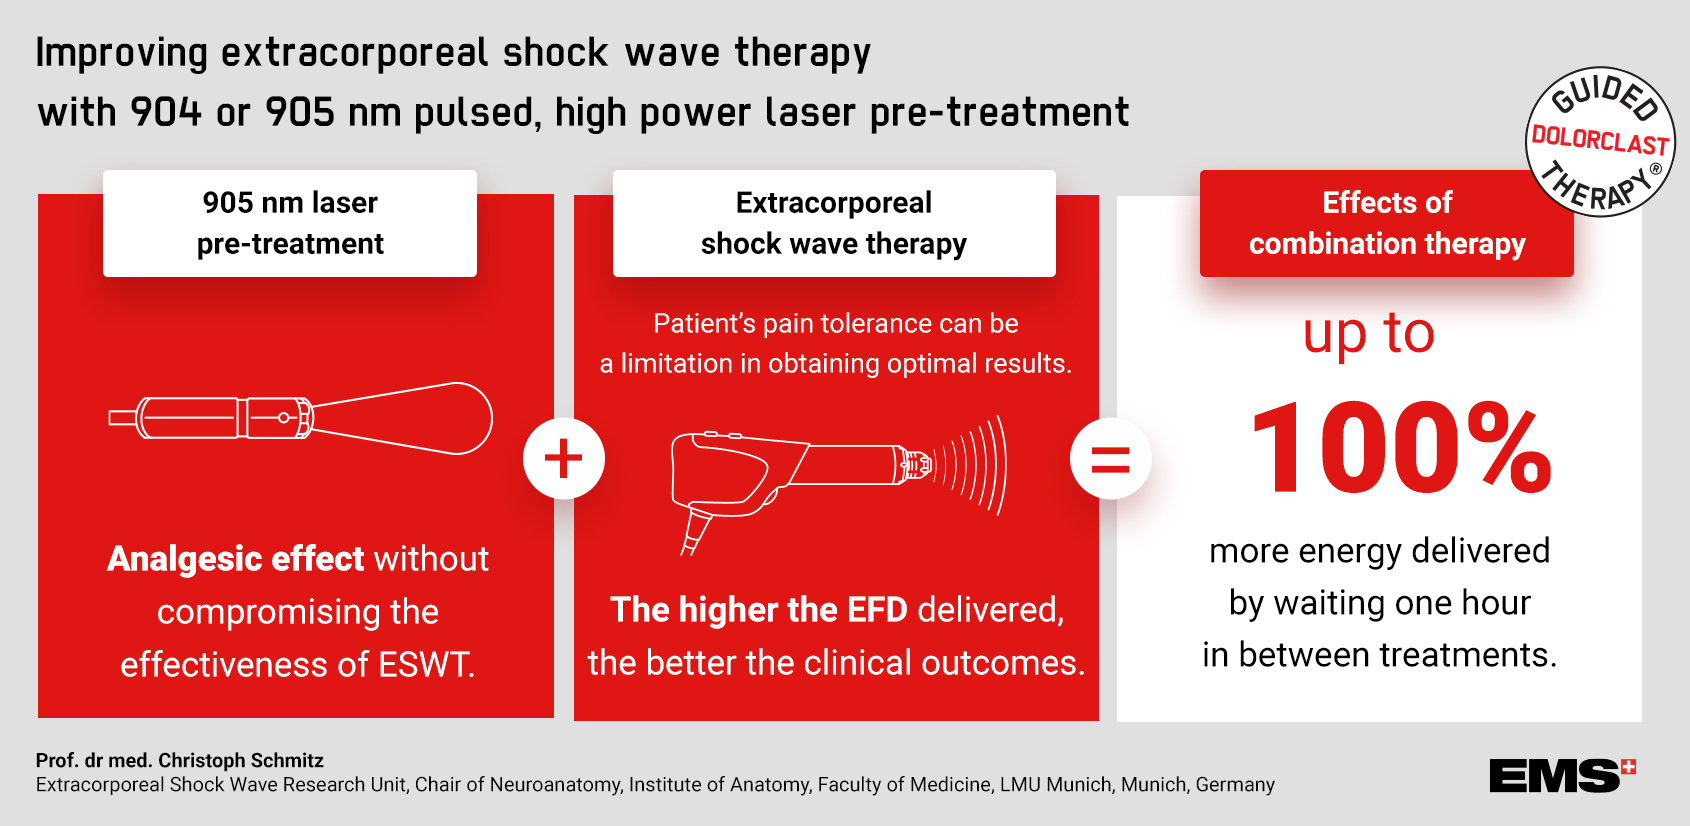 Improving extracorporeal shock wave therapy with 904 or 905 nm pulsed